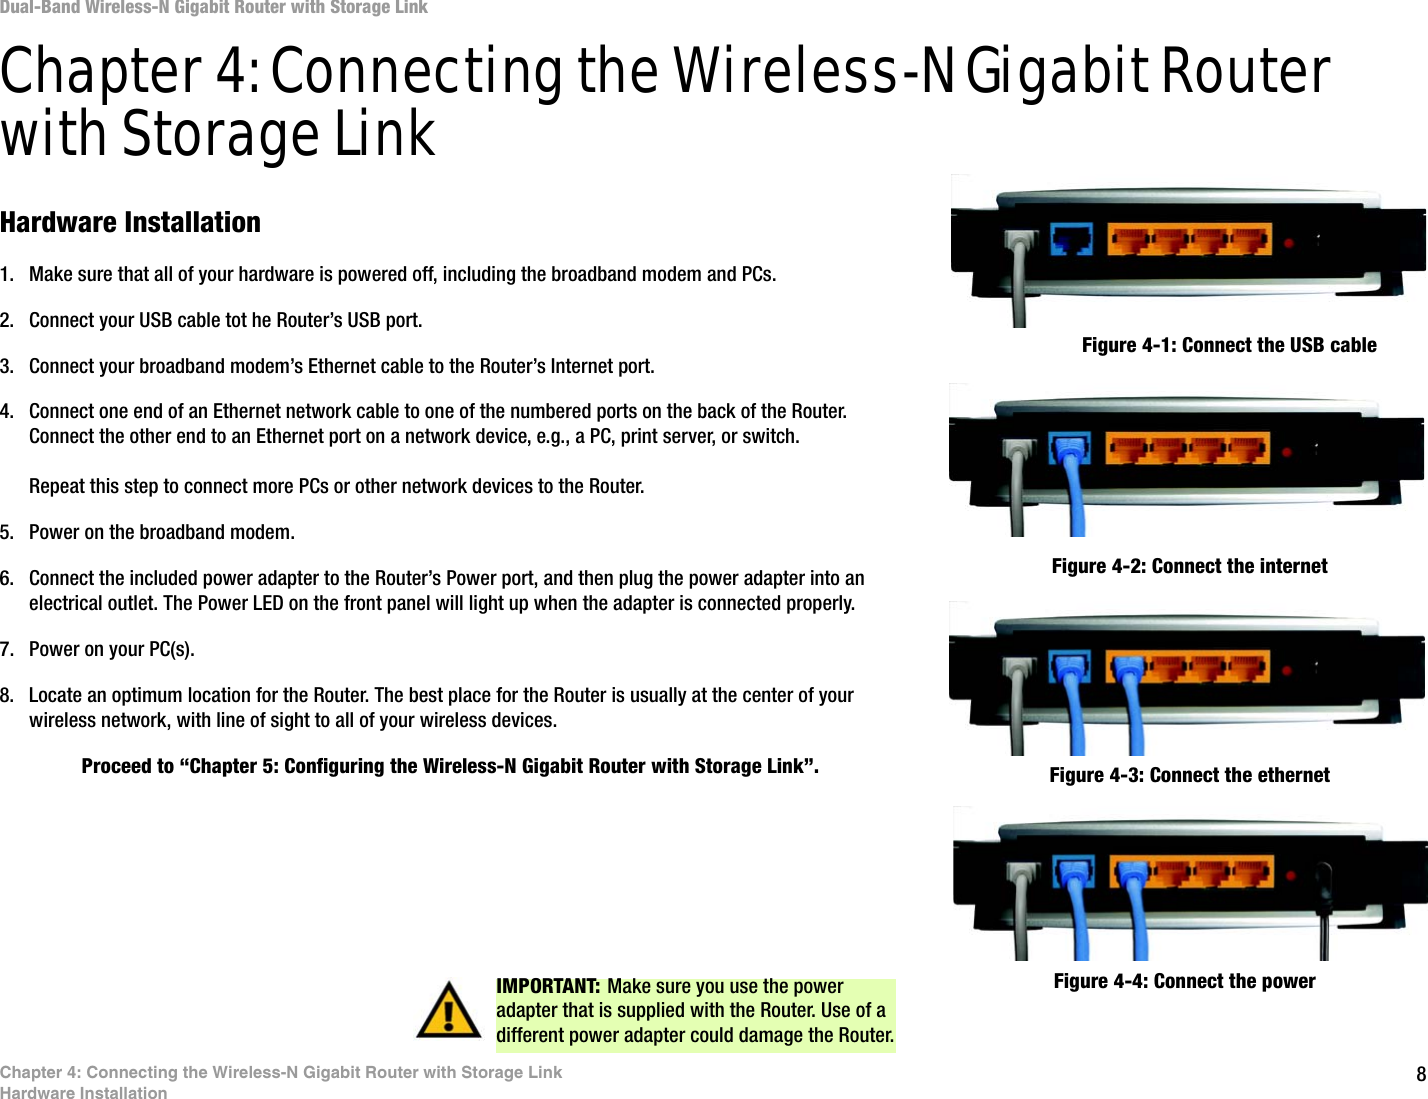 8Chapter 4: Connecting the Wireless-N Gigabit Router with Storage LinkHardware InstallationDual-Band Wireless-N Gigabit Router with Storage LinkChapter 4: Connecting the Wireless-N Gigabit Router with Storage LinkHardware Installation1. Make sure that all of your hardware is powered off, including the broadband modem and PCs.2. Connect your USB cable tot he Router’s USB port.3. Connect your broadband modem’s Ethernet cable to the Router’s Internet port.4. Connect one end of an Ethernet network cable to one of the numbered ports on the back of the Router. Connect the other end to an Ethernet port on a network device, e.g., a PC, print server, or switch.Repeat this step to connect more PCs or other network devices to the Router.5. Power on the broadband modem.6. Connect the included power adapter to the Router’s Power port, and then plug the power adapter into an electrical outlet. The Power LED on the front panel will light up when the adapter is connected properly.7. Power on your PC(s).8. Locate an optimum location for the Router. The best place for the Router is usually at the center of your wireless network, with line of sight to all of your wireless devices.Proceed to “Chapter 5: Configuring the Wireless-N Gigabit Router with Storage Link”.Figure 4-1: Connect the USB cable Figure 4-2: Connect the internetFigure 4-4: Connect the powerIMPORTANT: Make sure you use the power adapter that is supplied with the Router. Use of a different power adapter could damage the Router.Figure 4-3: Connect the ethernet